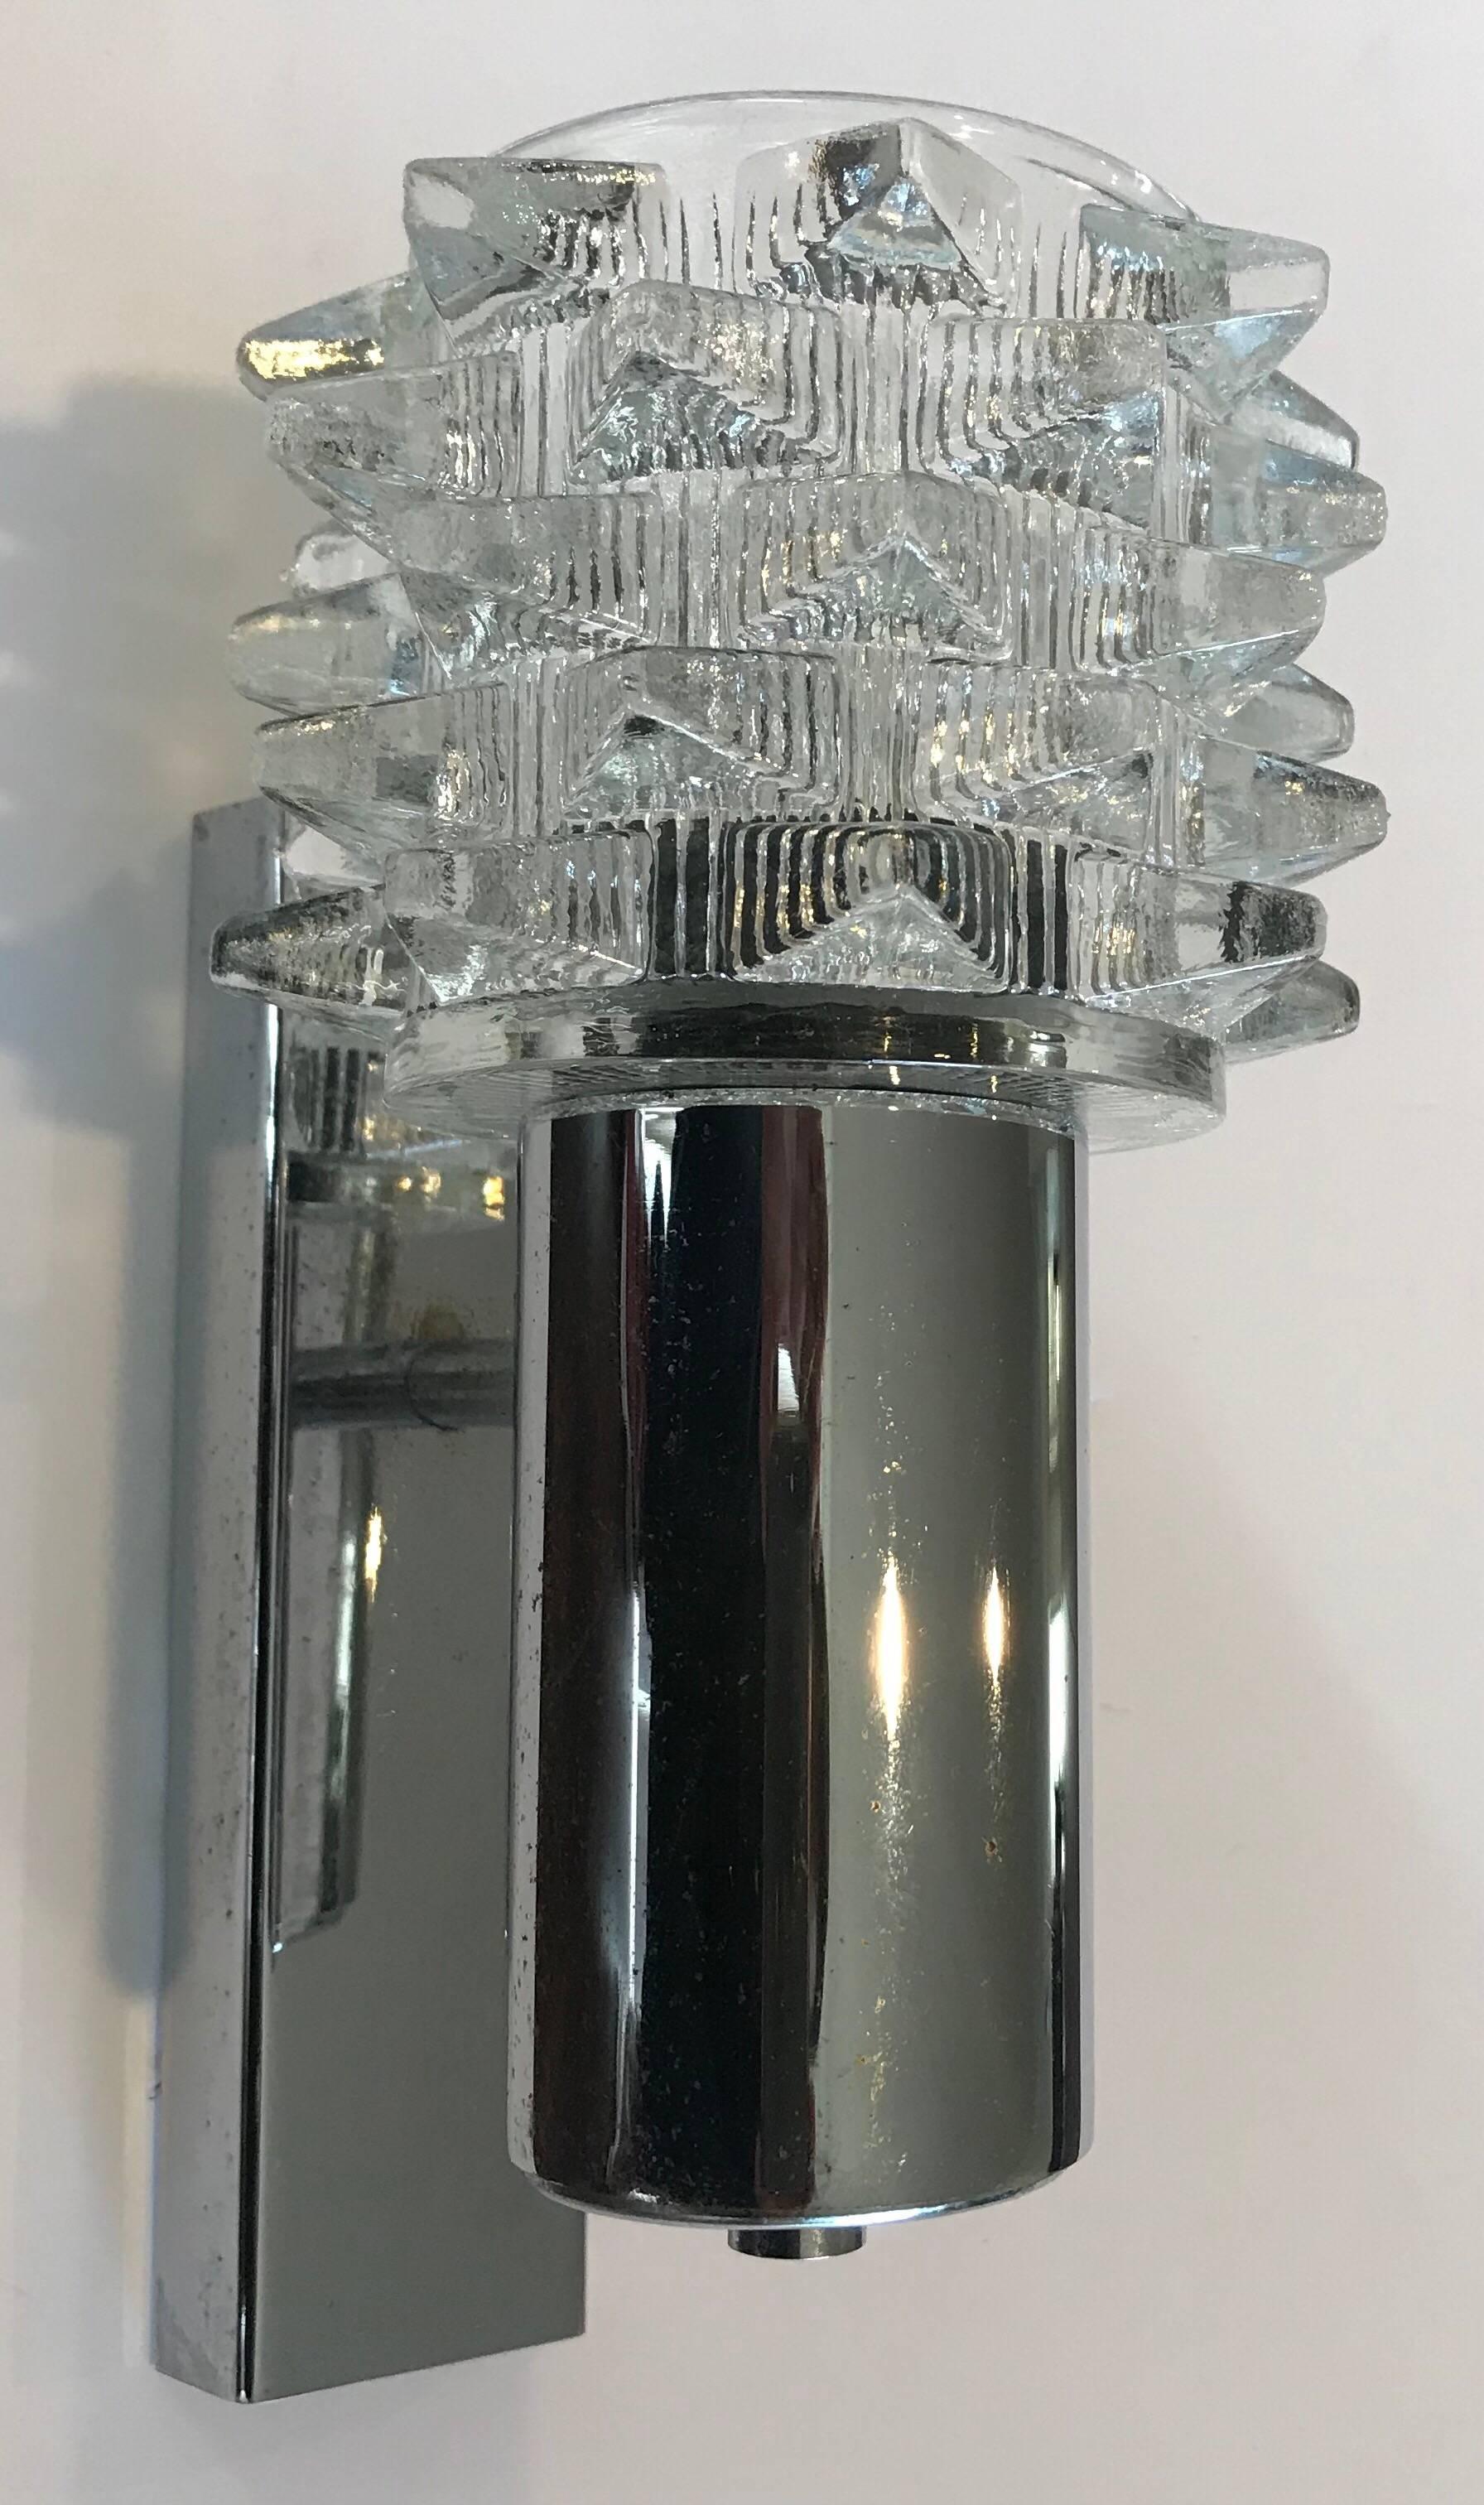 A pair of polished chrome wall lights with heavy crystal glass shades by the Dutch light maker, RAAK. The sconces can be mounted upward or downward according to preference. Four available.